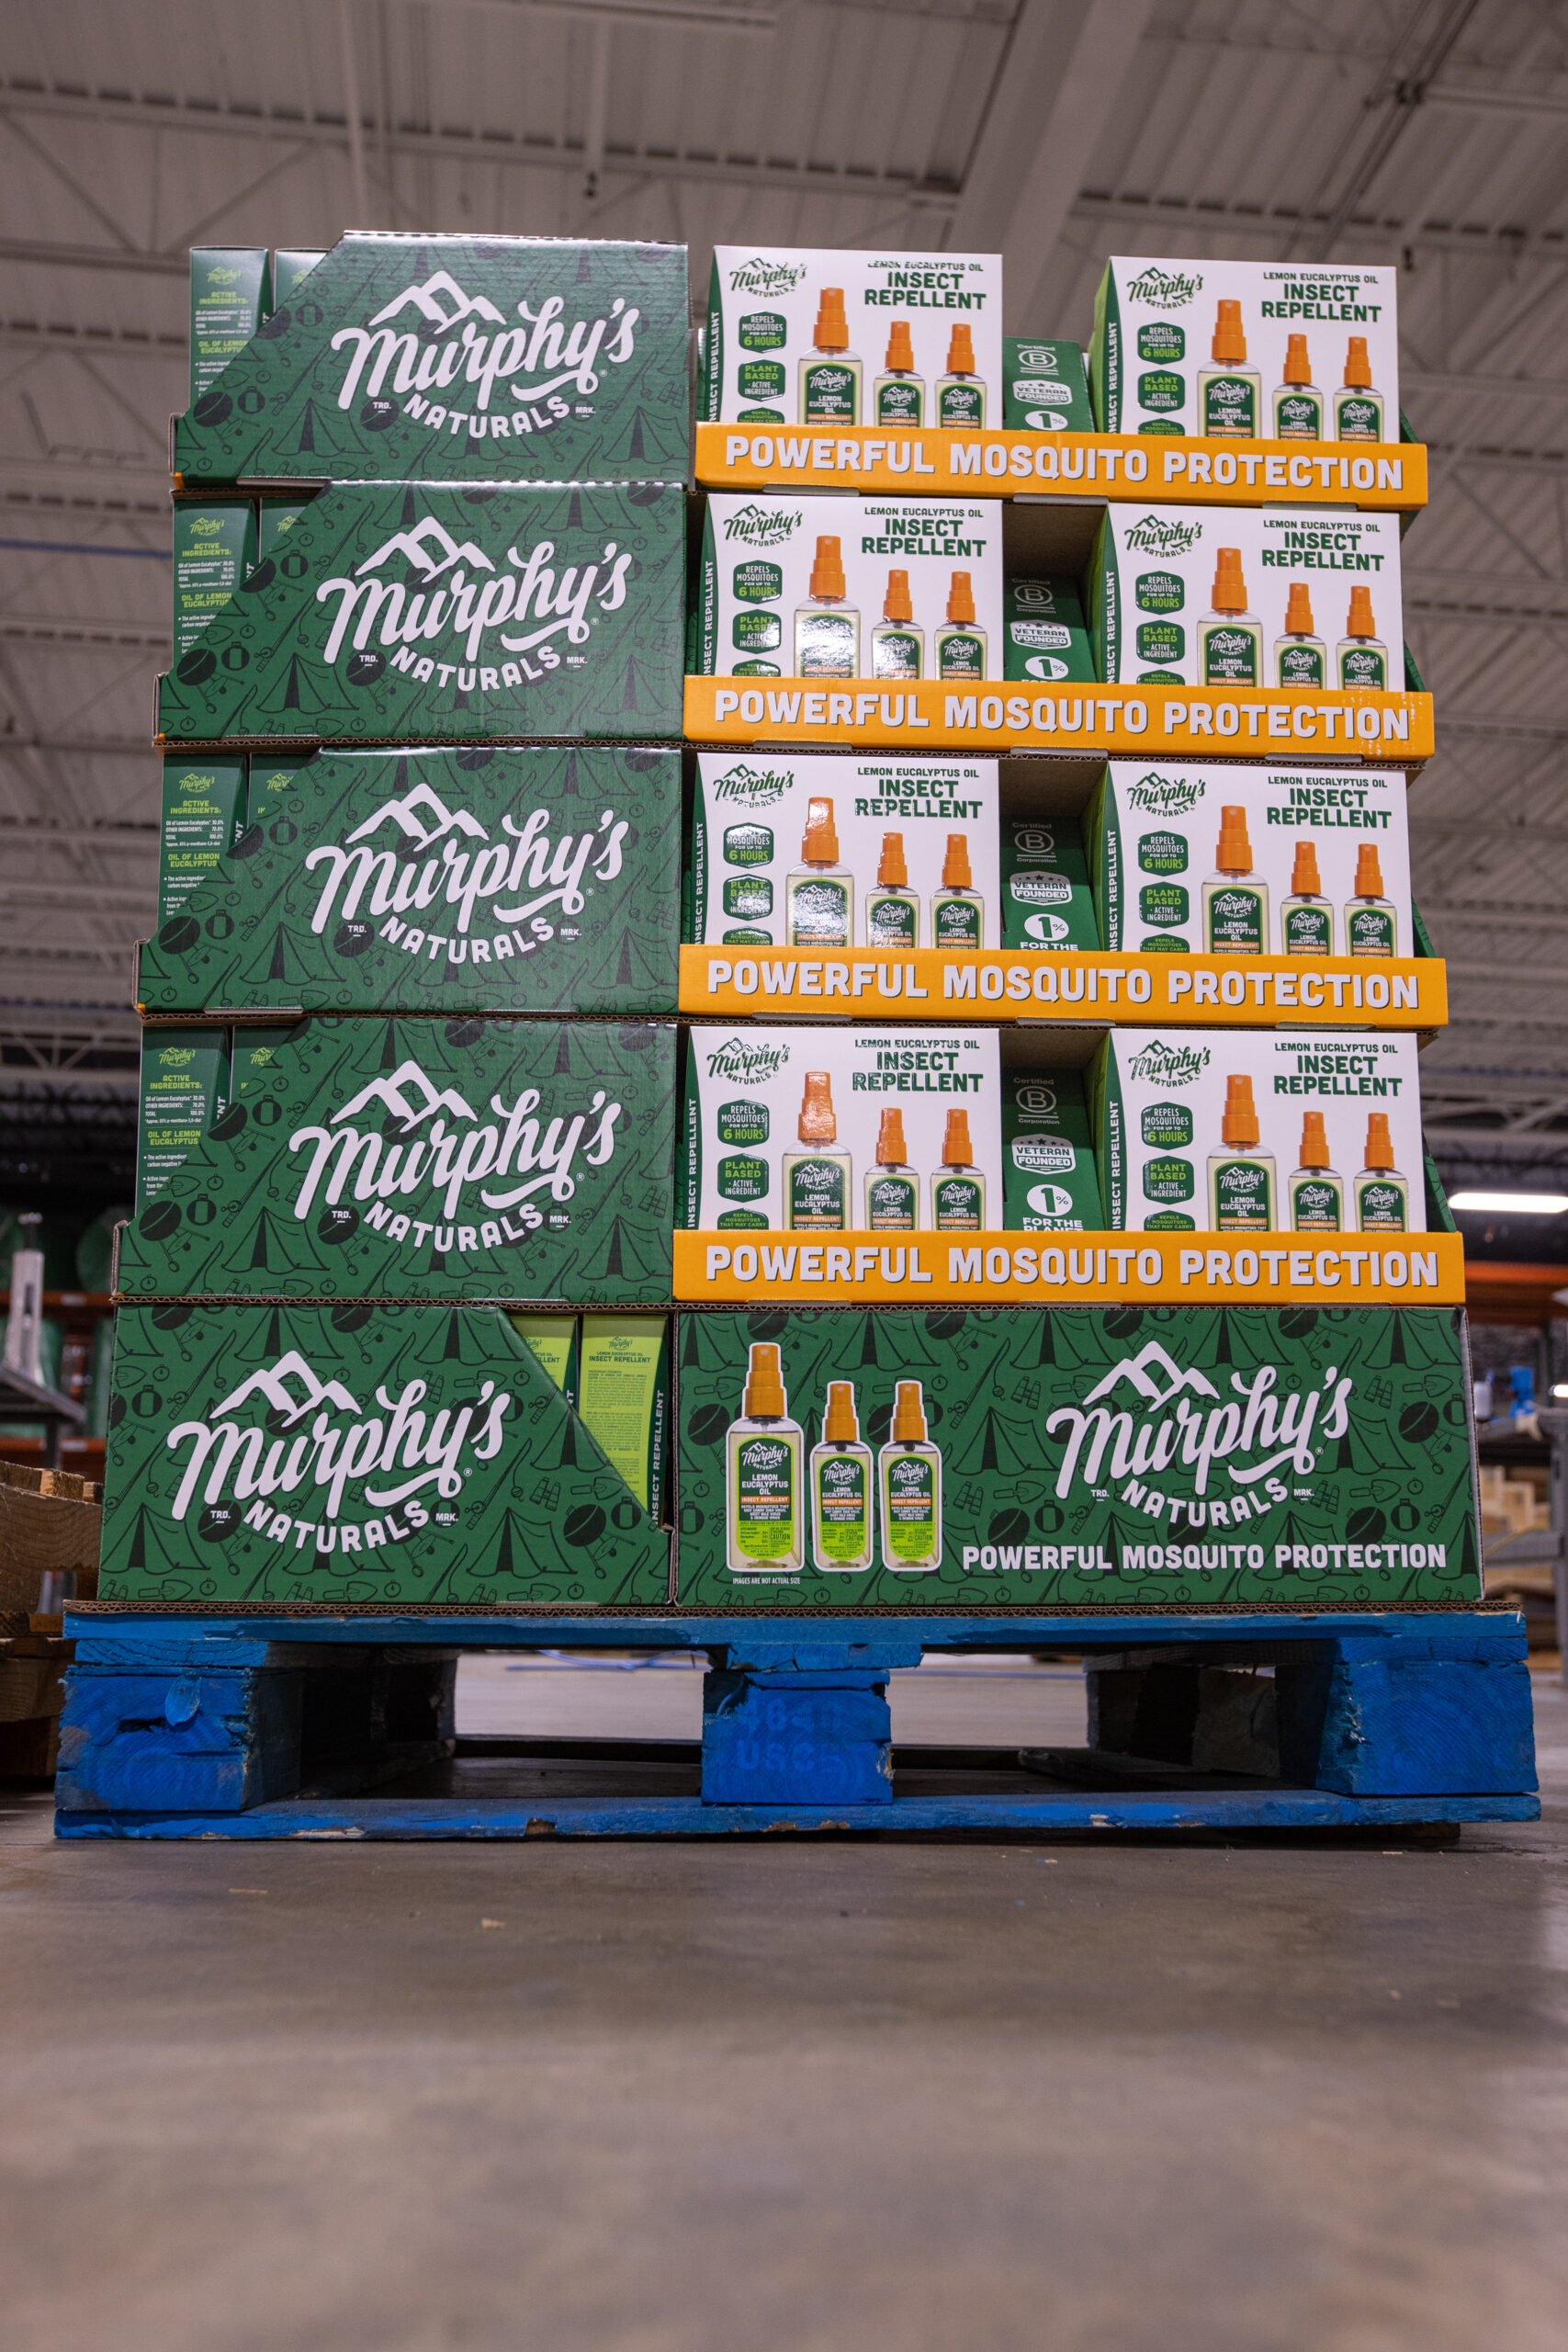 a blue pallet is stacked with Murphy's Naturals insect repellent.